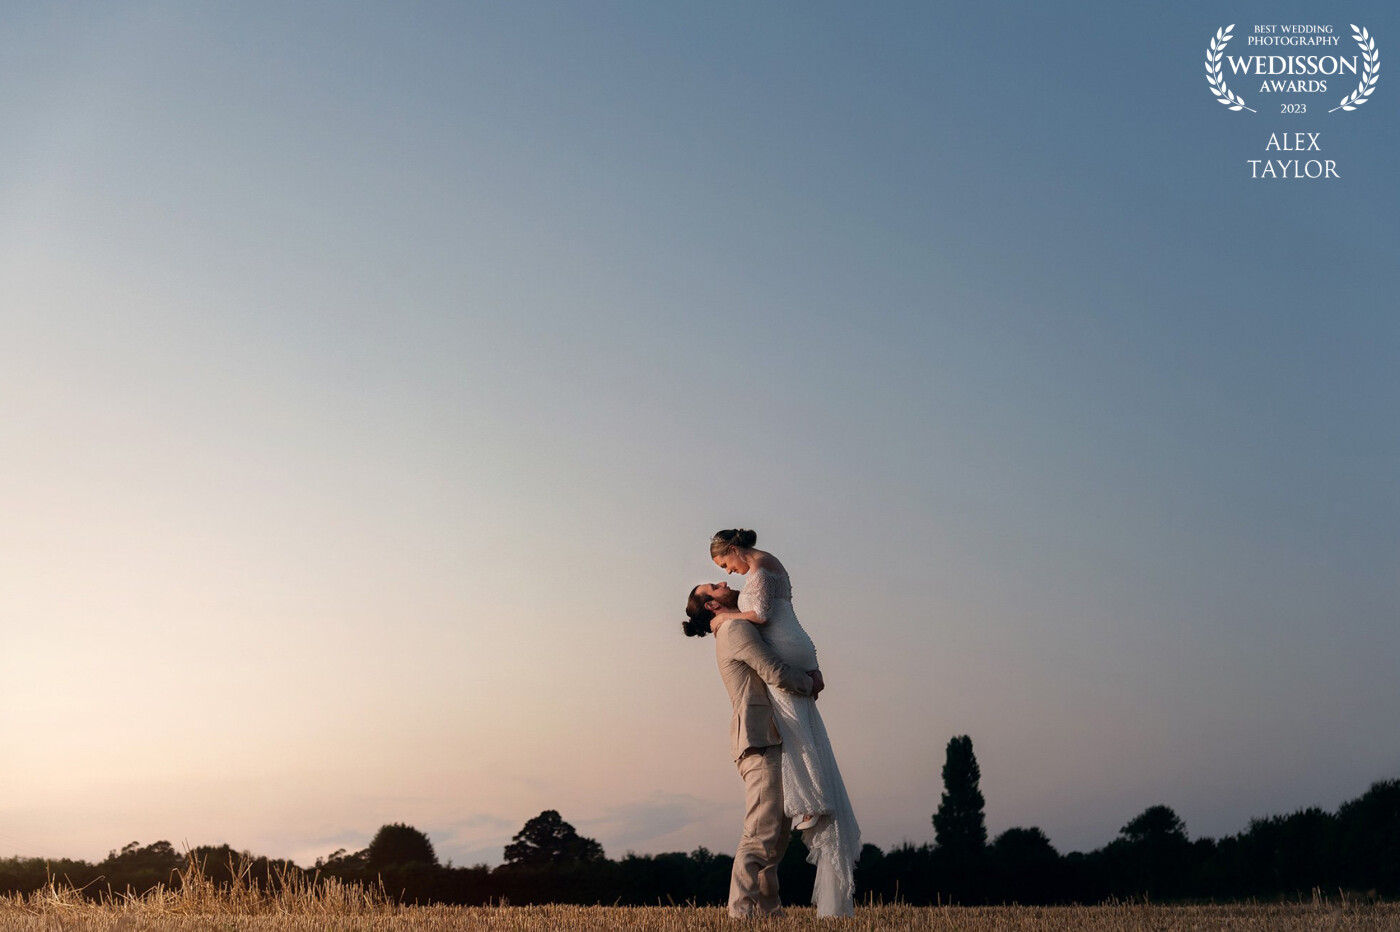 As the sun started to dip in the sky in the charming rural villiage of Cotton we headed out to a nearby field for a peaceful moment to catch the last of the rays. <br />
<br />
Ryan lifted his new wife Becky as they celebrated the start of their married life together.